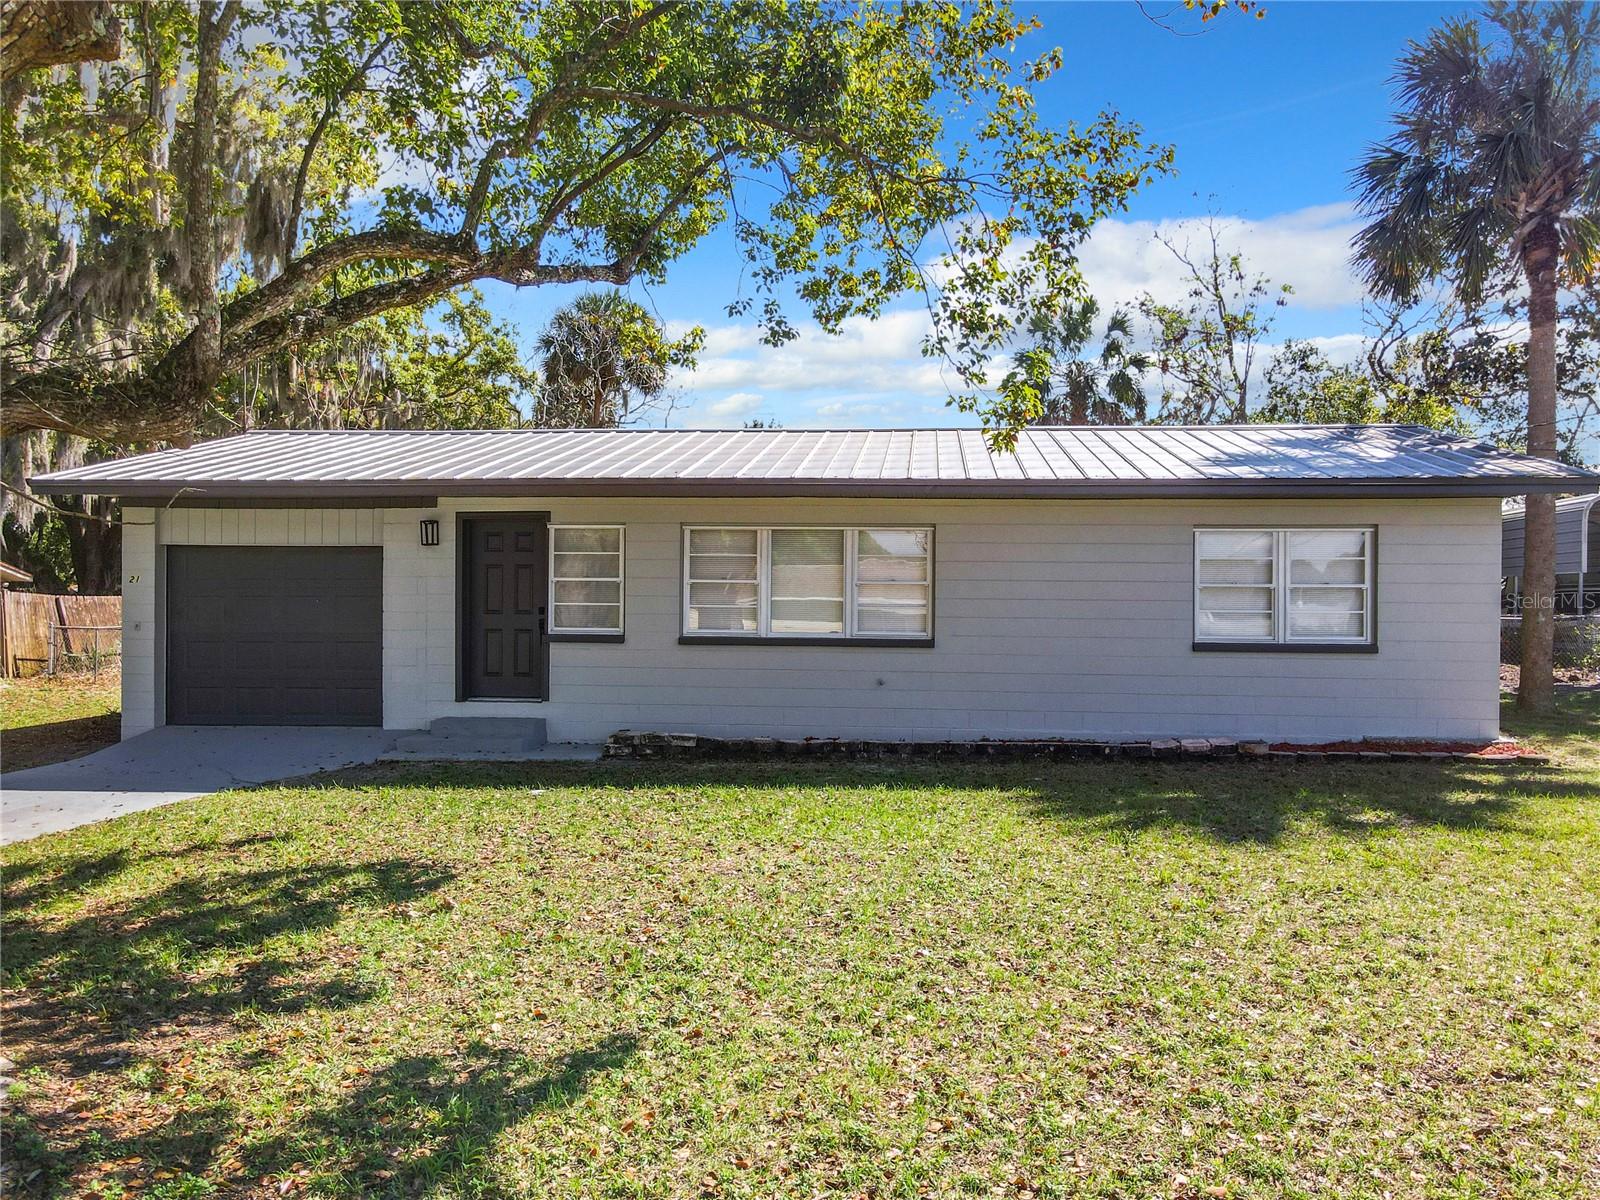 Details for 21 Catalina Drive, DEBARY, FL 32713